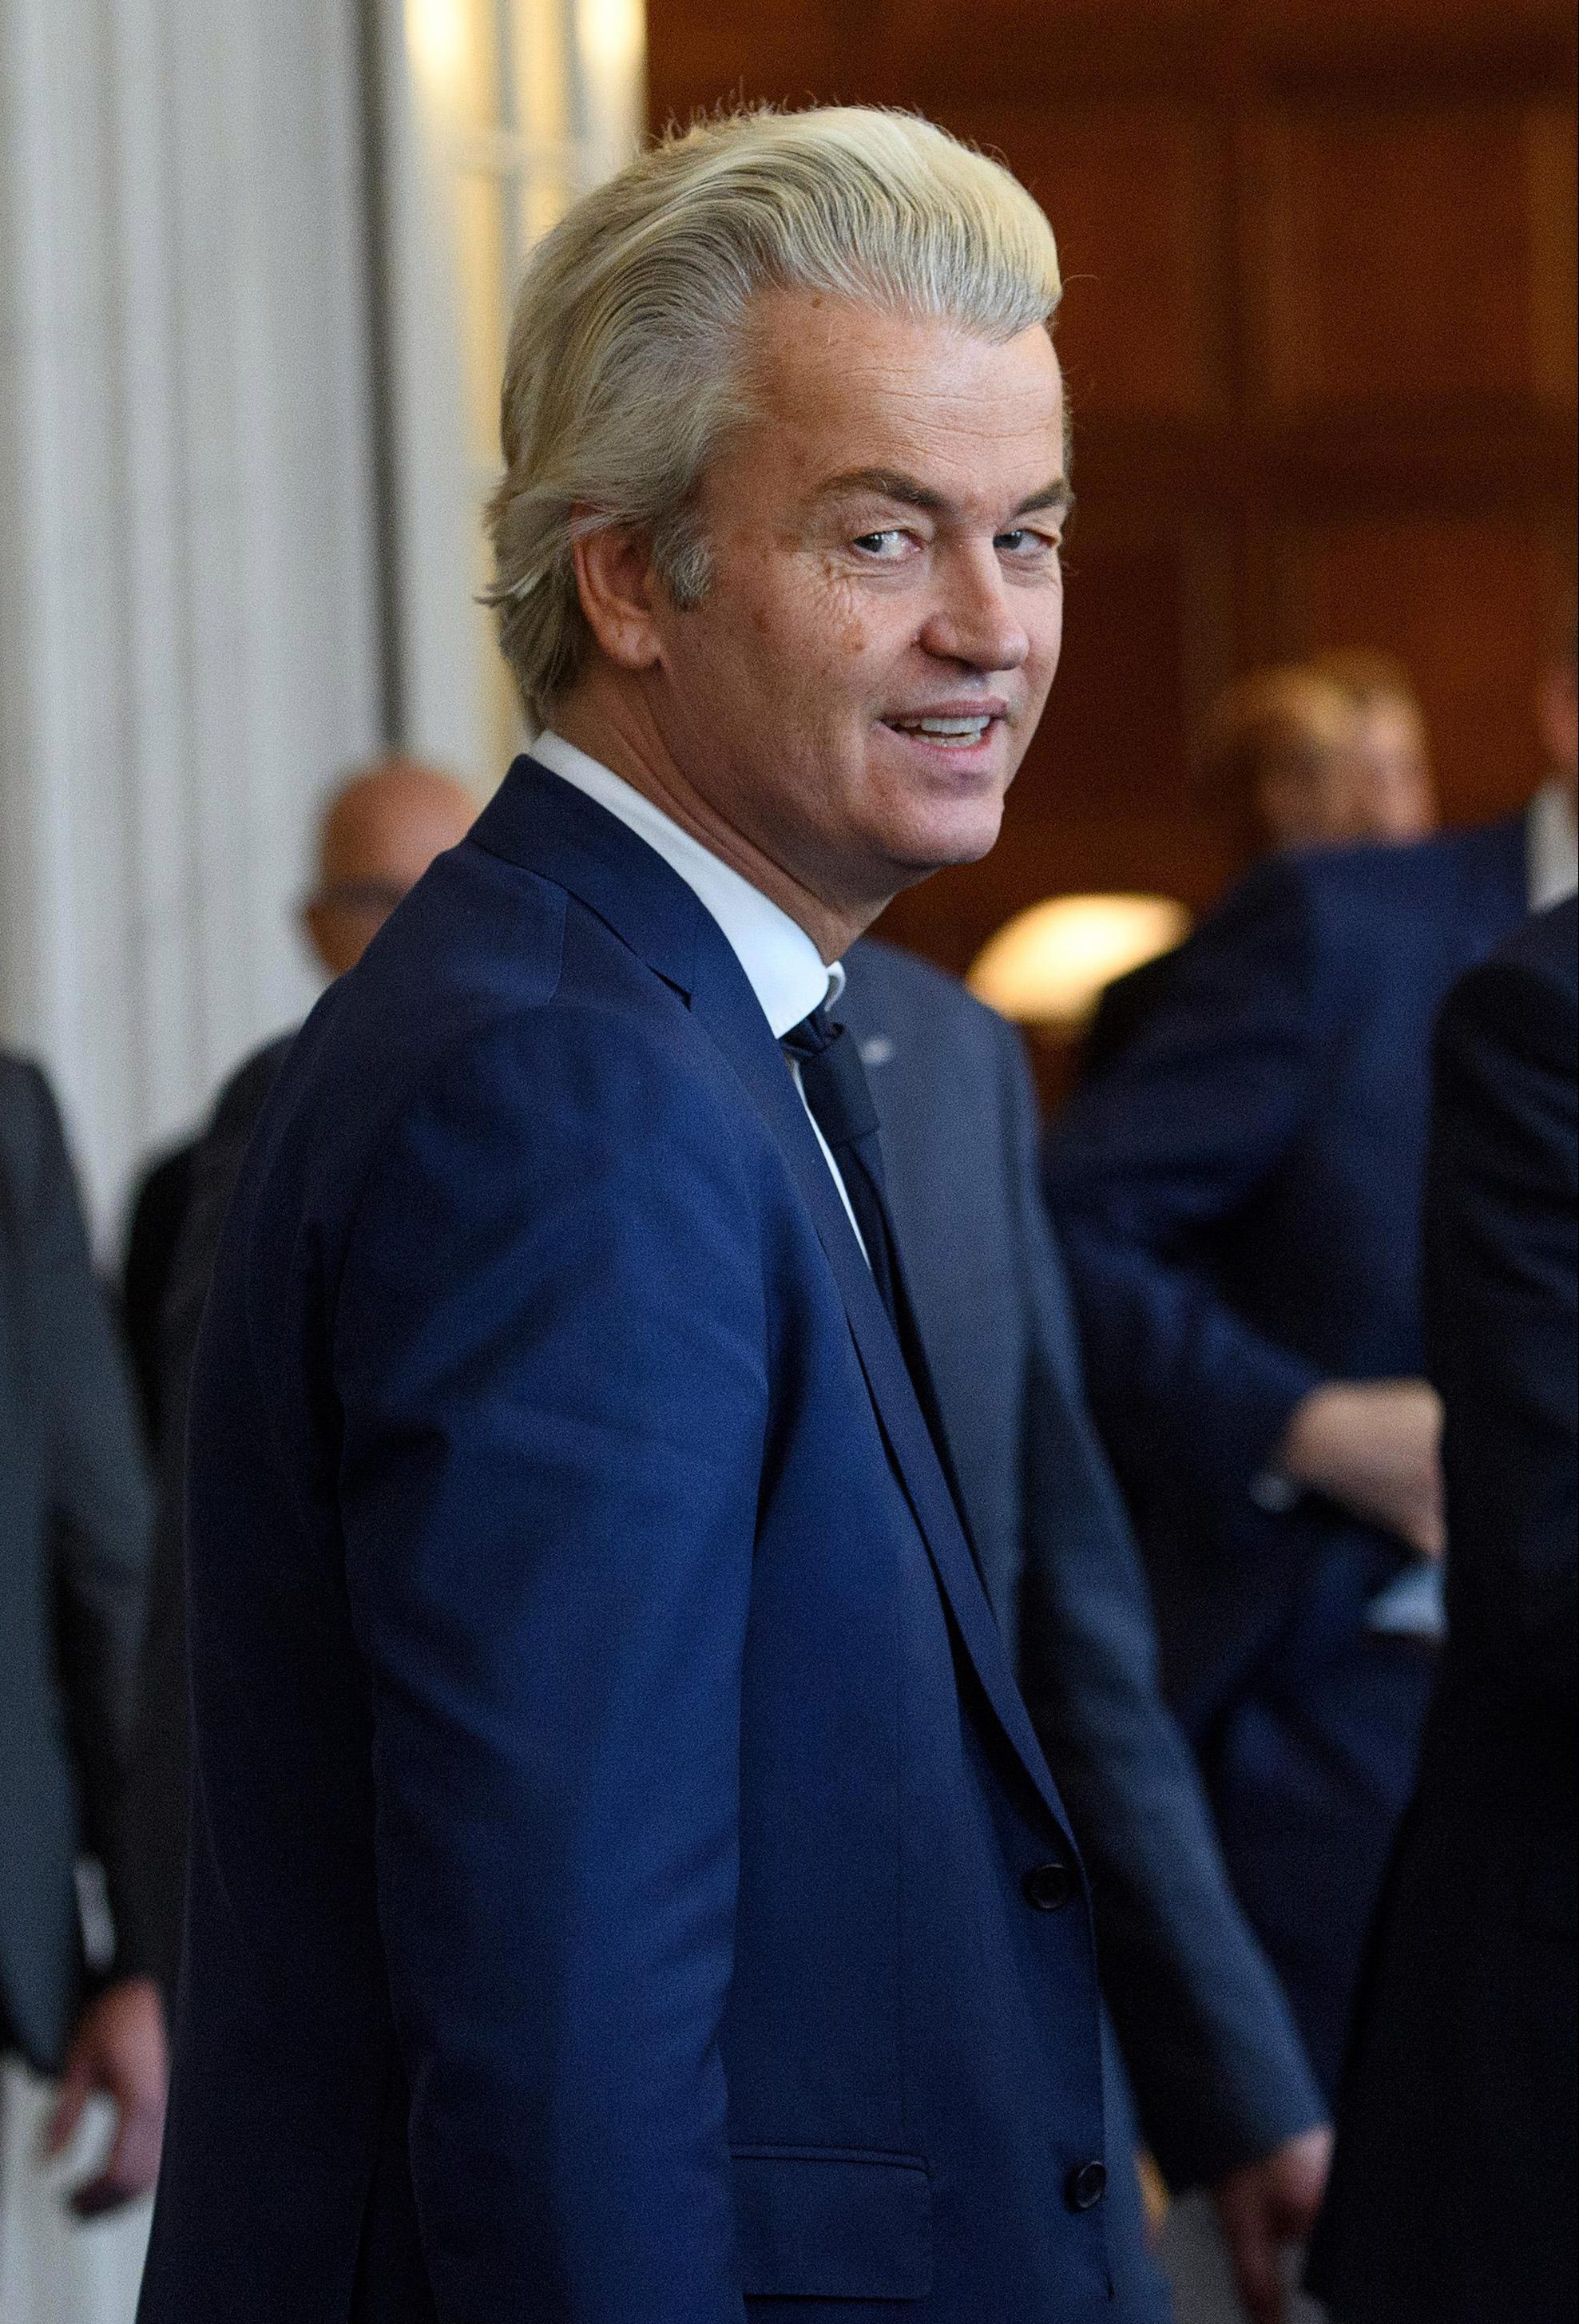 right winger geert wilders of the freedom party came second in the election